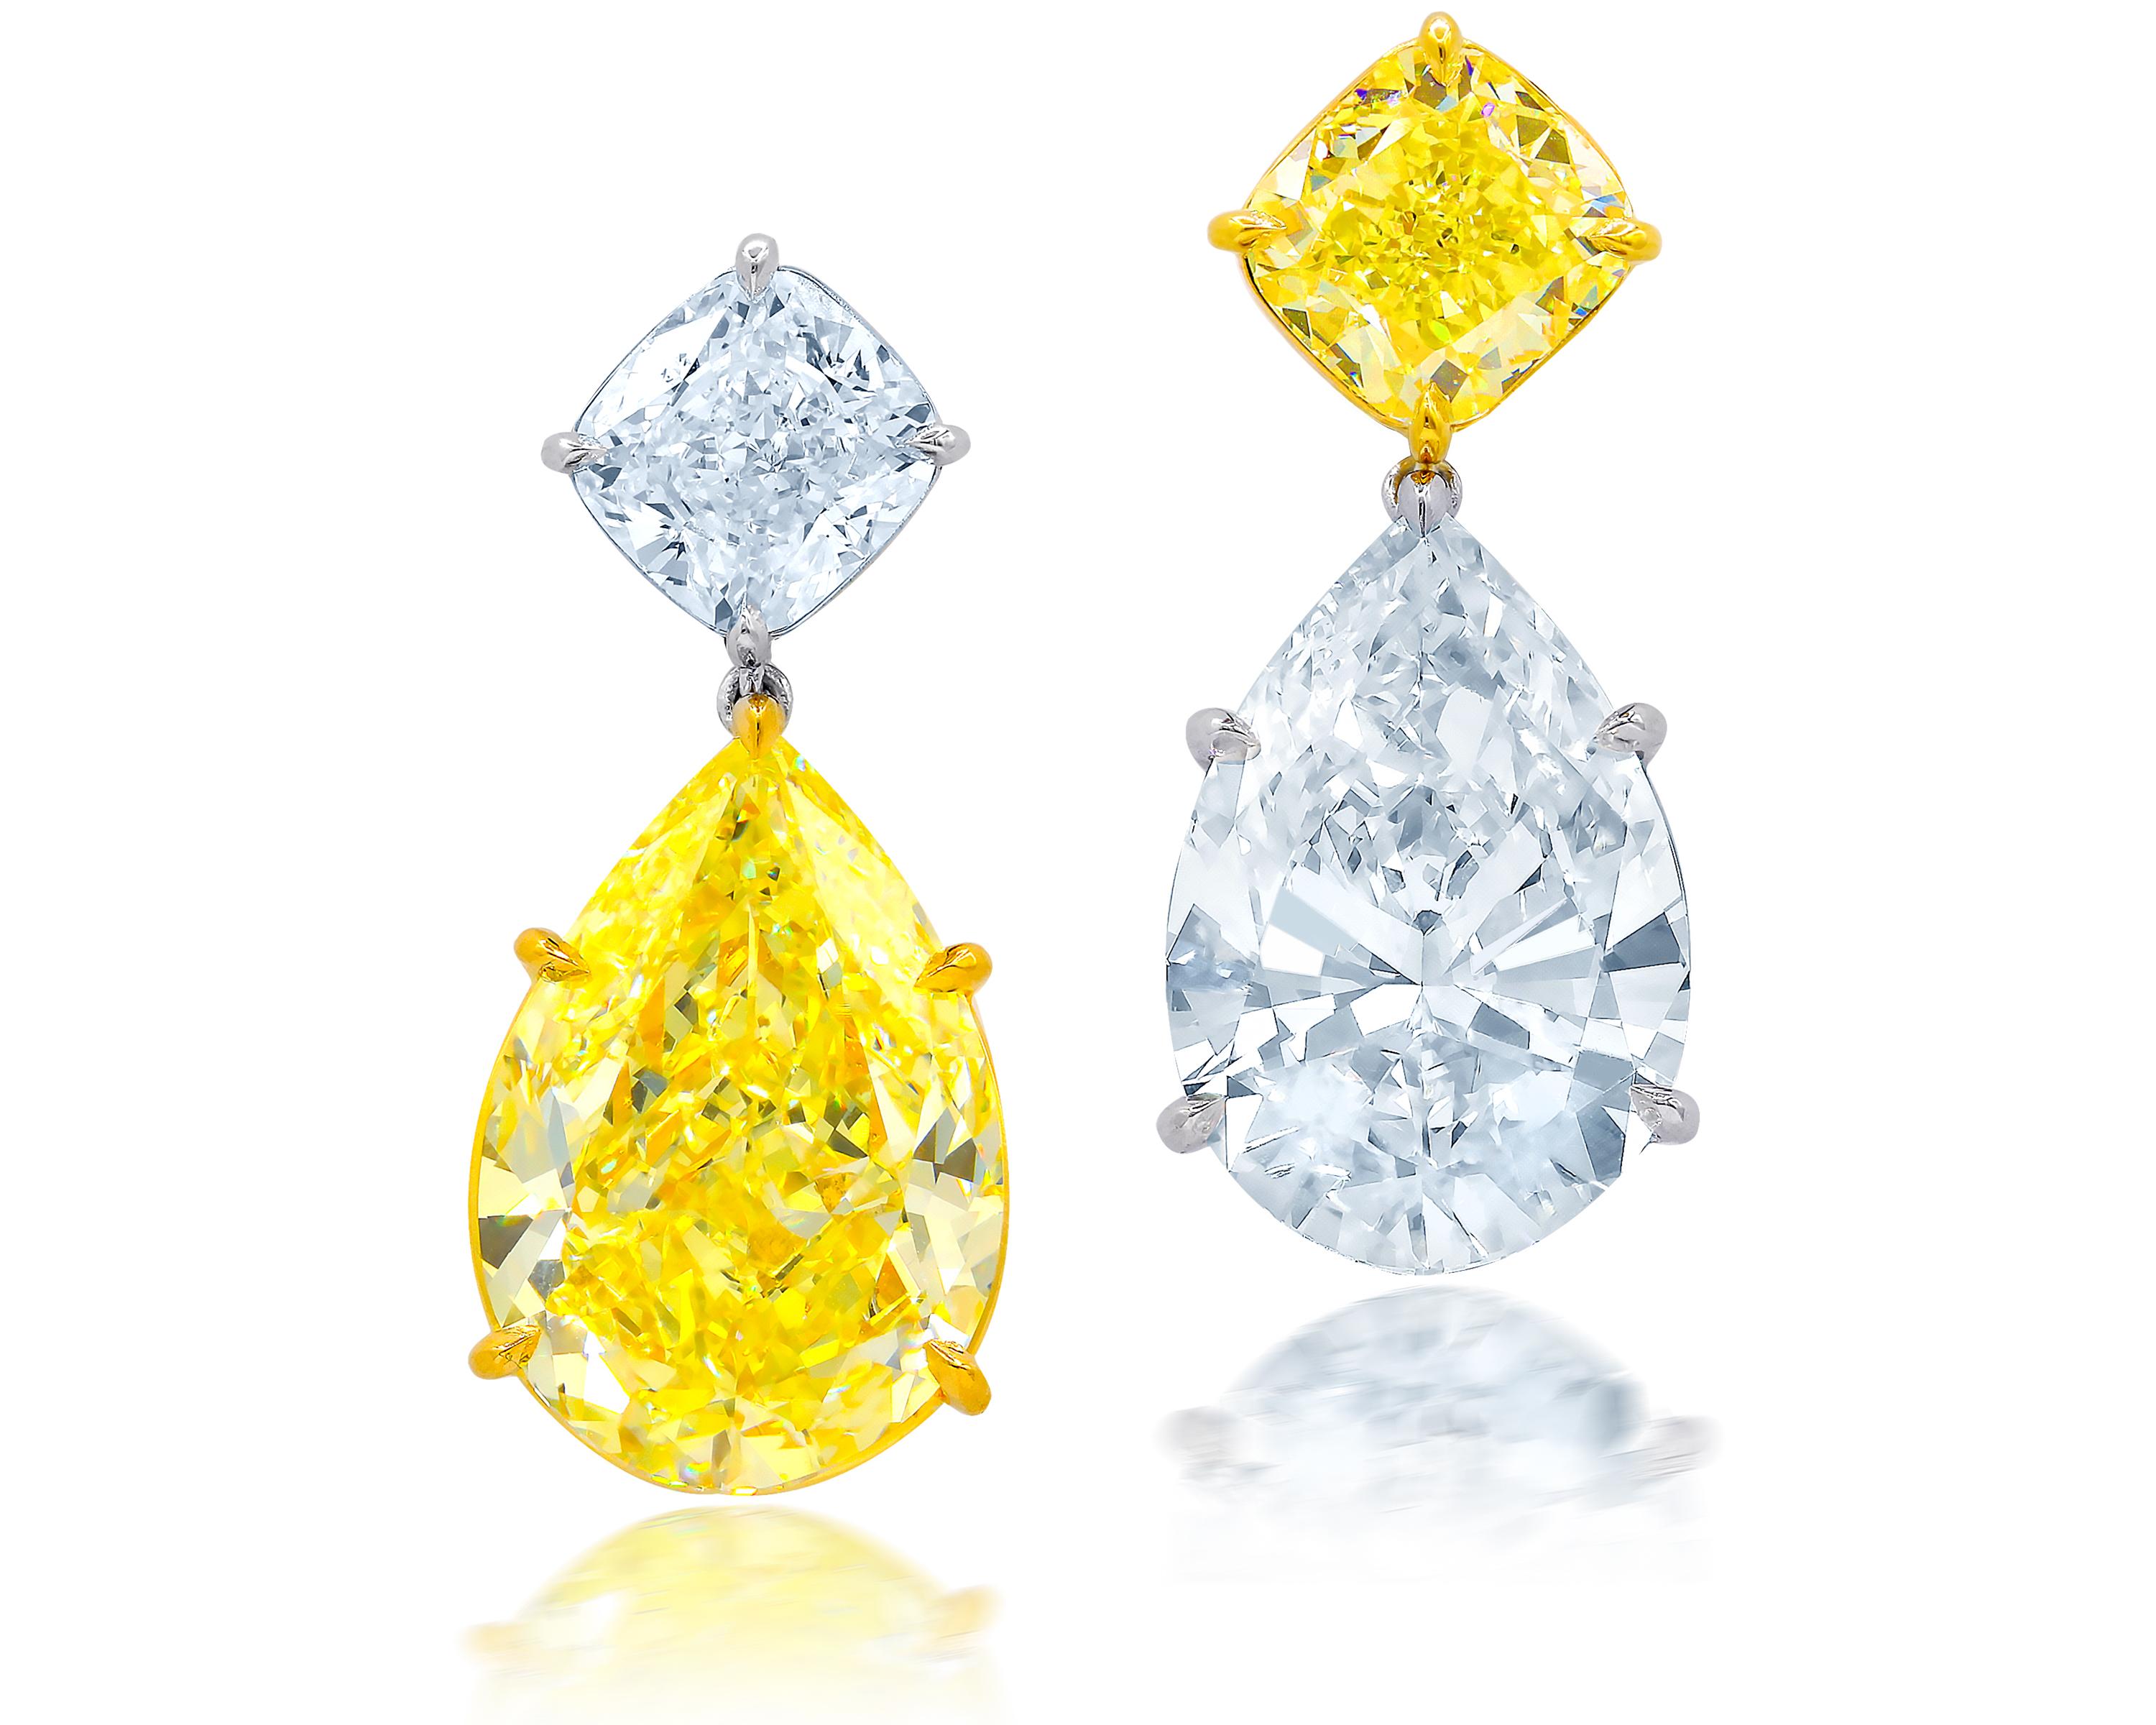 Magnificent 18tk and platinum diamond earrings with pear shape (psc293)14.73 fvs2 and (psc301)15.91 hanging on bottom and tops are  (radc826)4.00ct   cushion fancy intense yellow vs1 and 4.01ct  e vs2 cushion  (rads1052)
